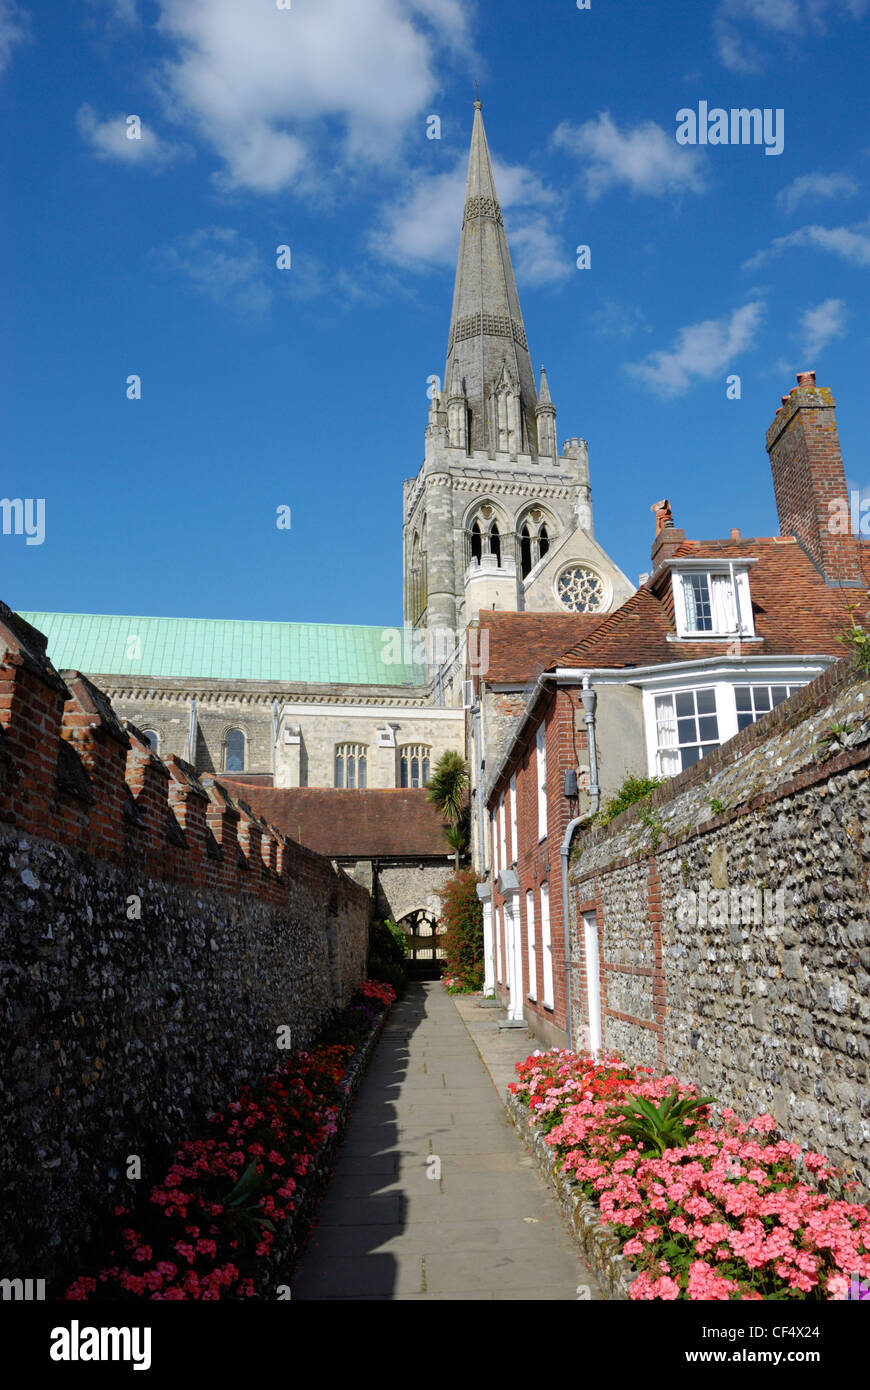 St Richard's Walk leading to Chichester Cathedral. The spire is a landmark for sailors as Chichester is the only English Cathedr Stock Photo